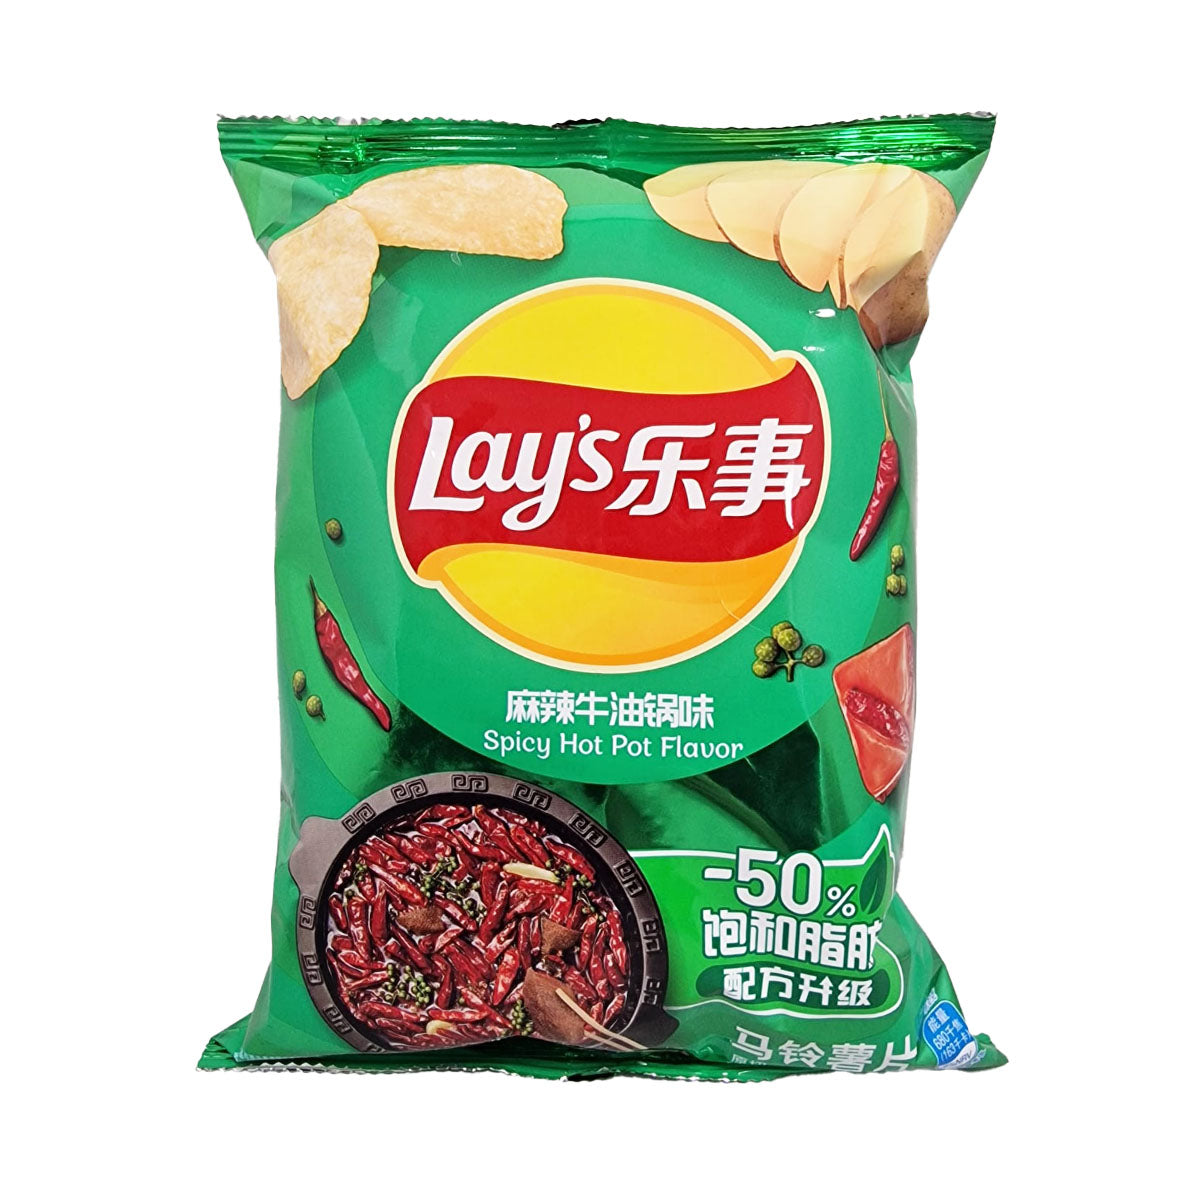 Lays Chips - Spicy Hot Pot Flavor